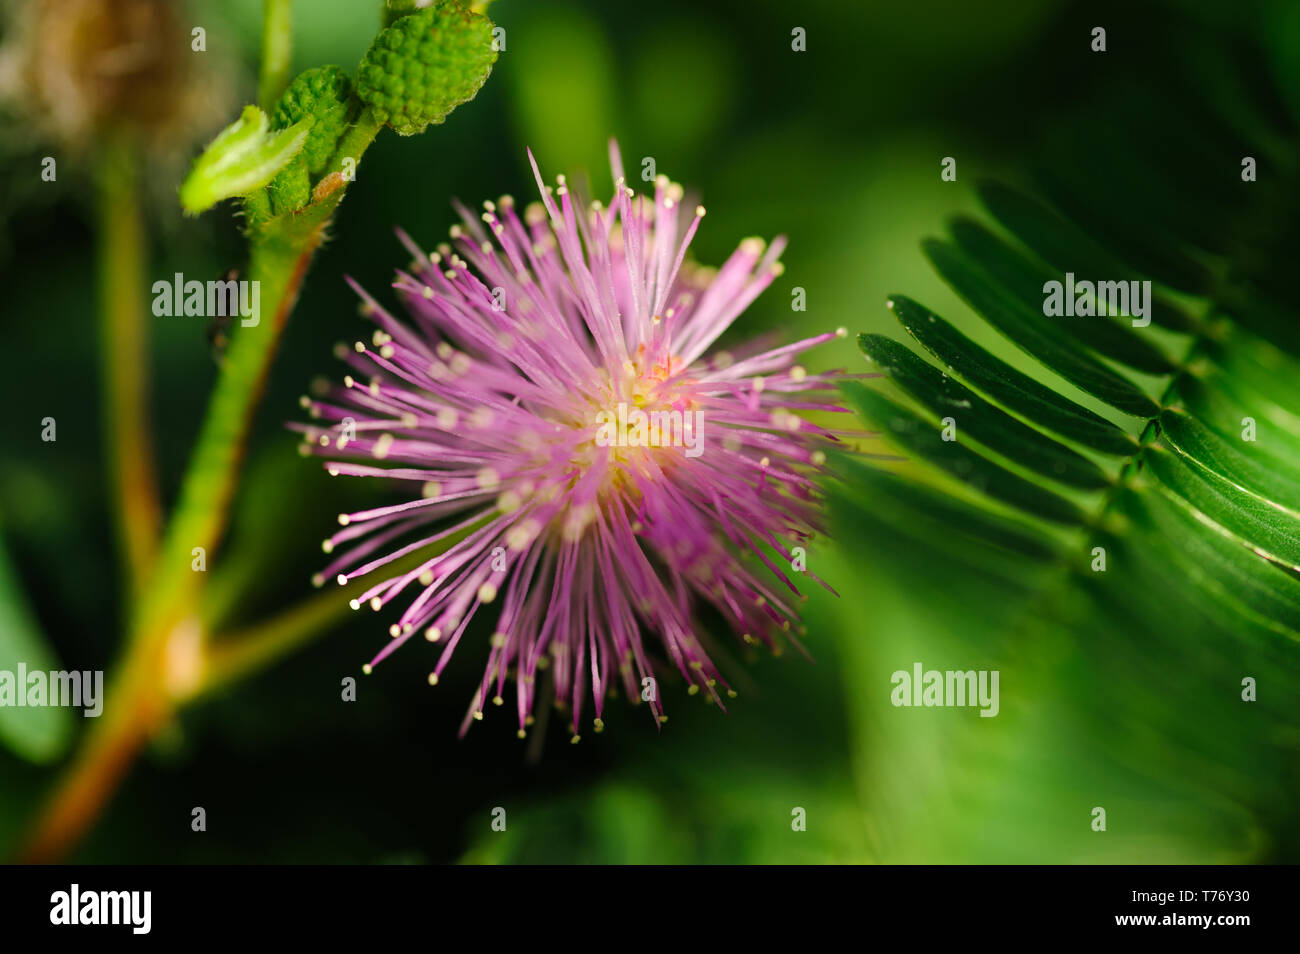 Close up image of mimosa flower isolated against background with sharp rich colourfull and contrasty details Stock Photo